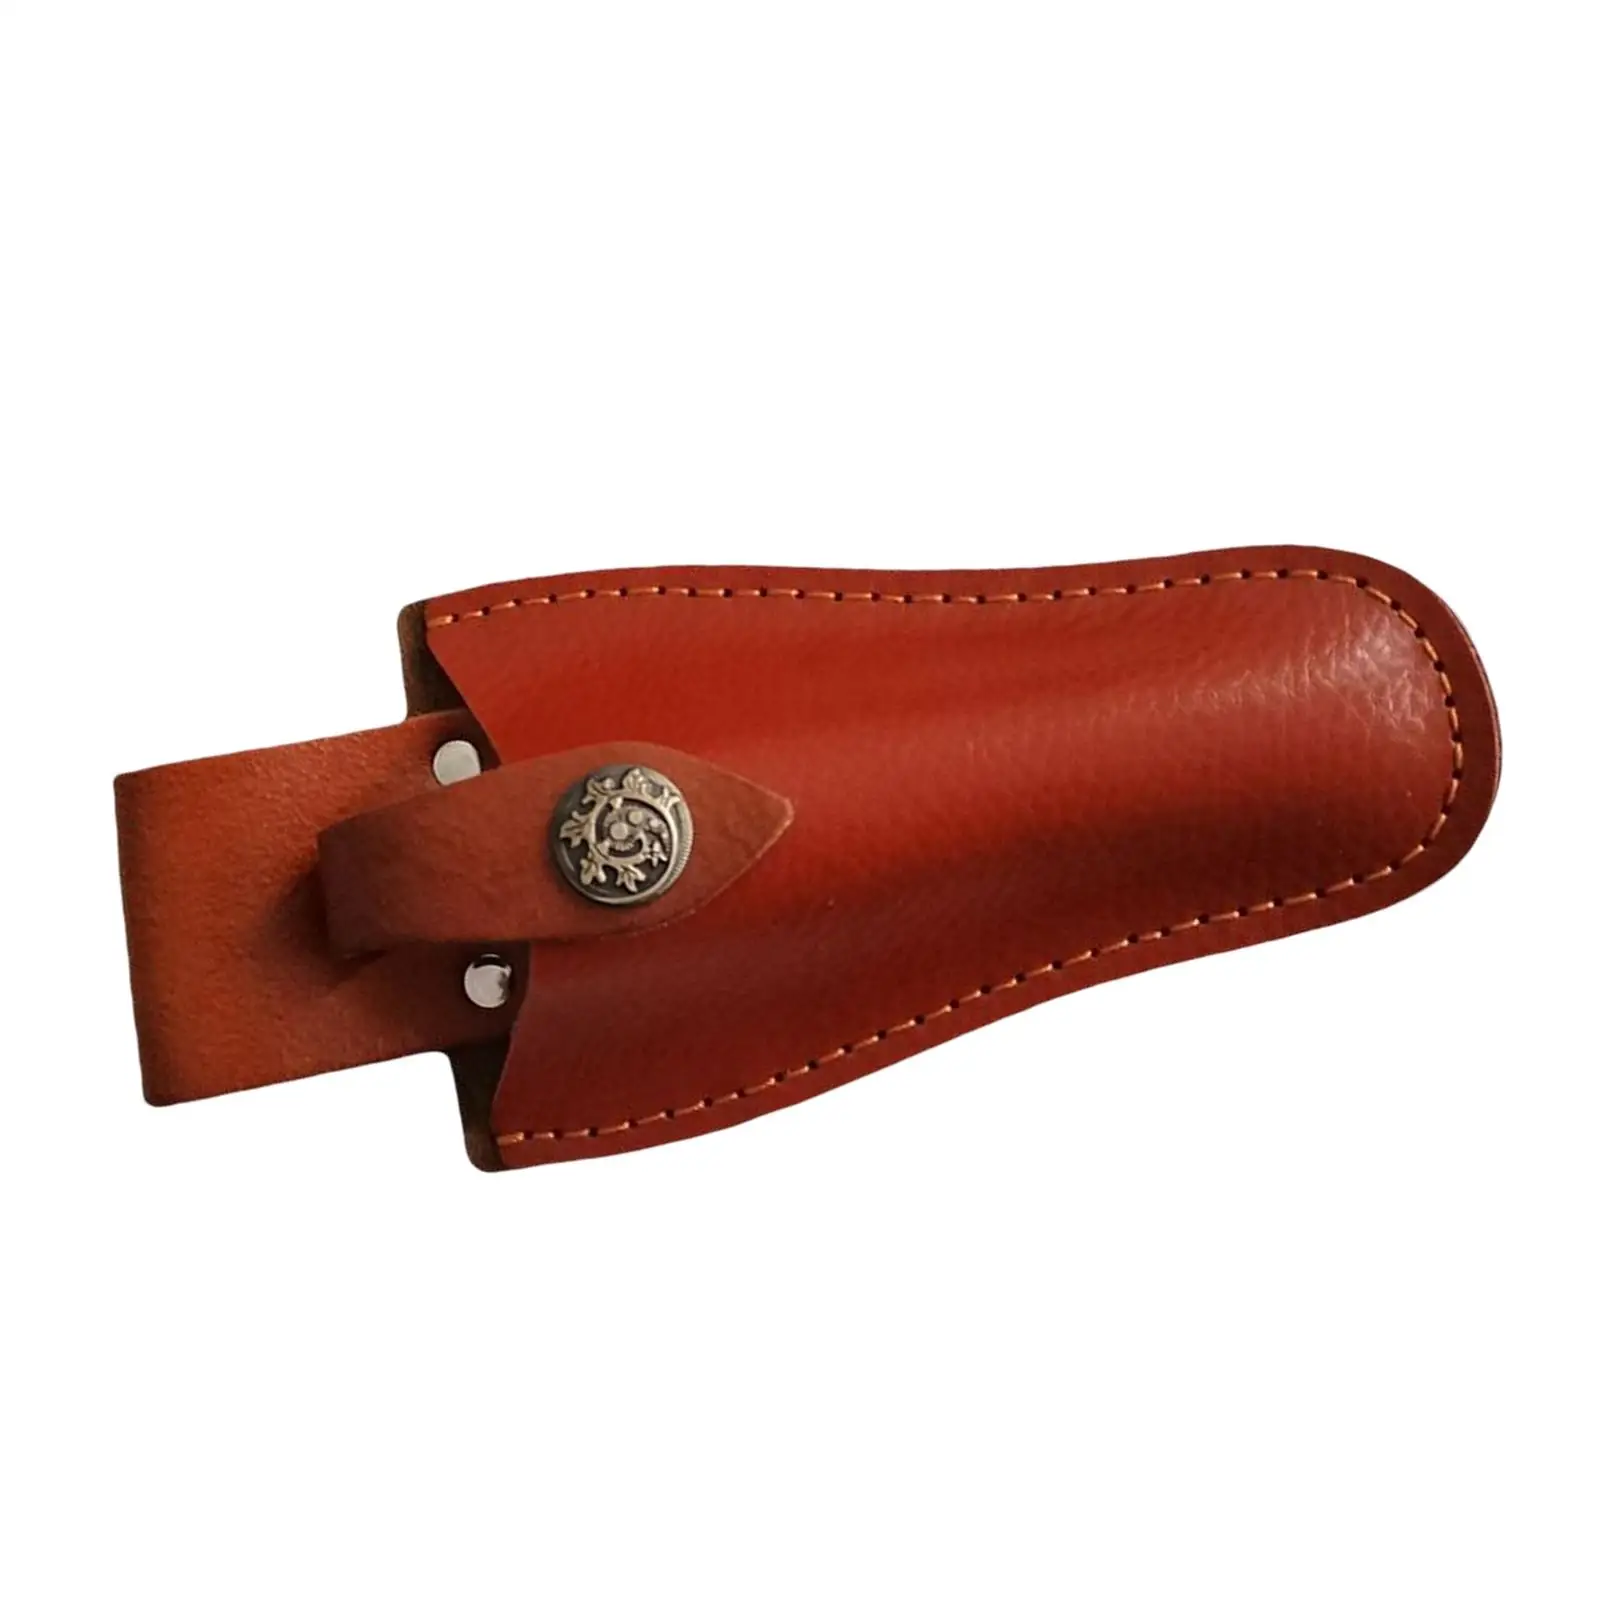 PU Leather Sheath Protective Case Tool Belt Accessory Pruning Shear for Garden Pruning Fruit Tree Pruning Shears